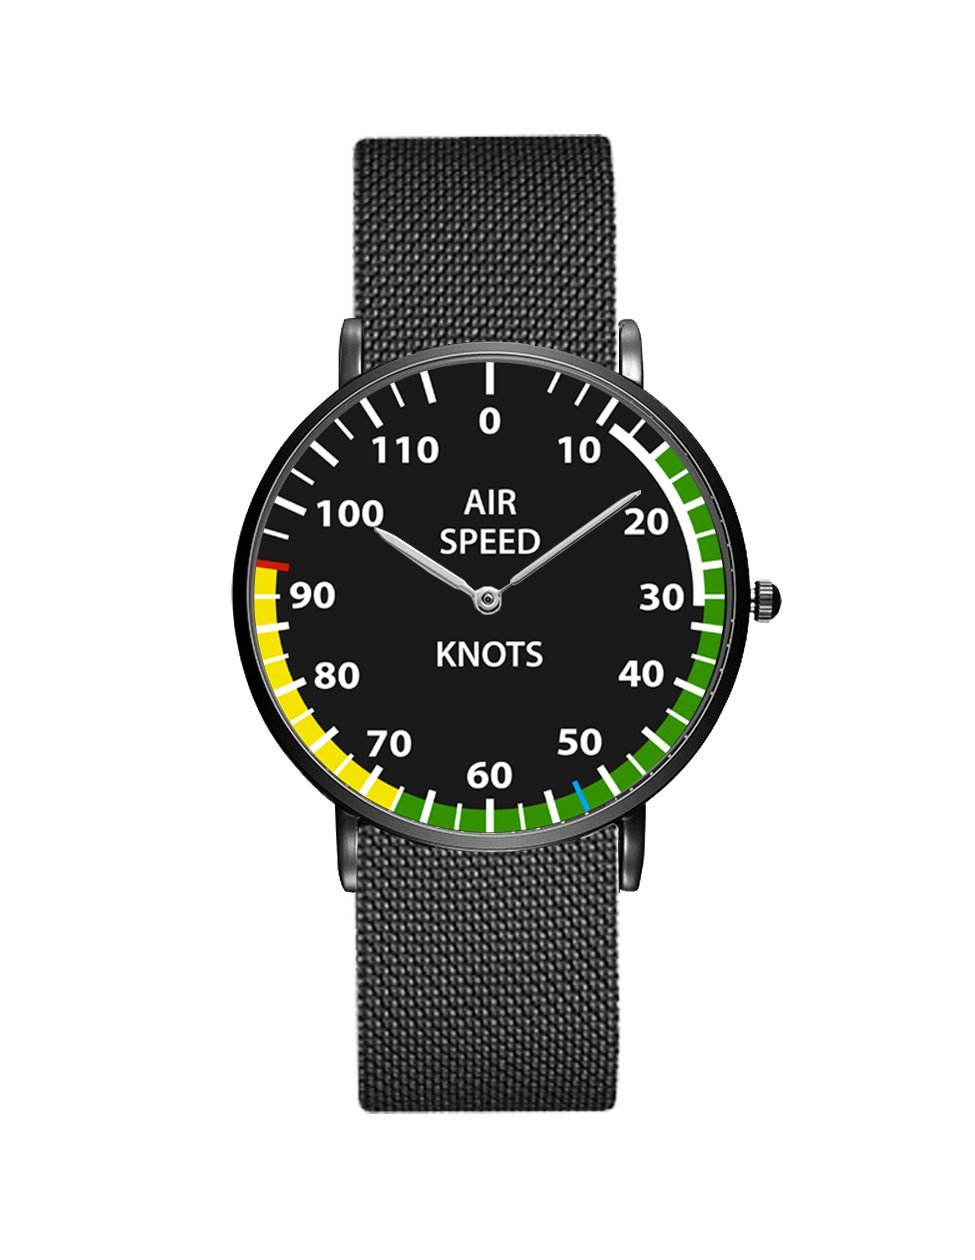 Airplane Instrument Series (Airspeed) Stainless Steel Strap Watches Pilot Eyes Store Black & Stainless Steel Strap 